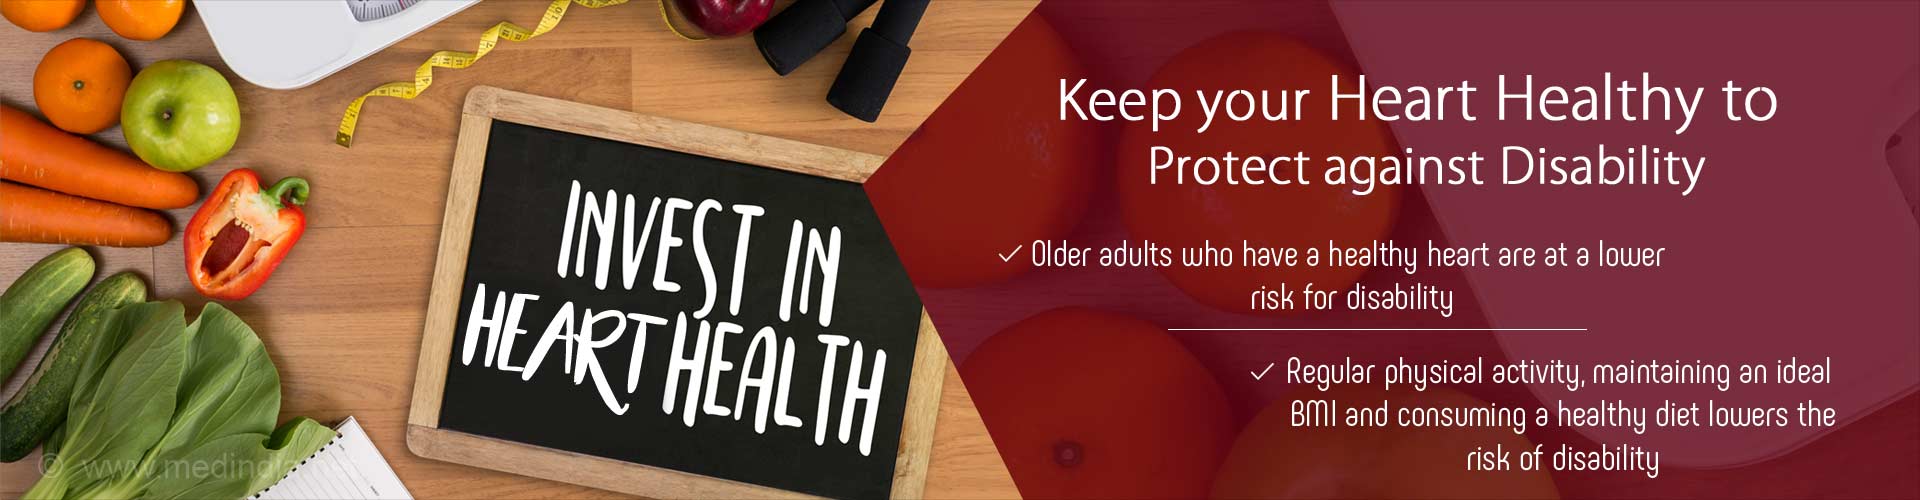 Keep your heart healthy to protect against disability
- Older adults who have a healthy heart are at a lower risk for disability
- Regular physical activity, maintaining an ideal BMI and consuming a healthy diet lowers the risk of disability
